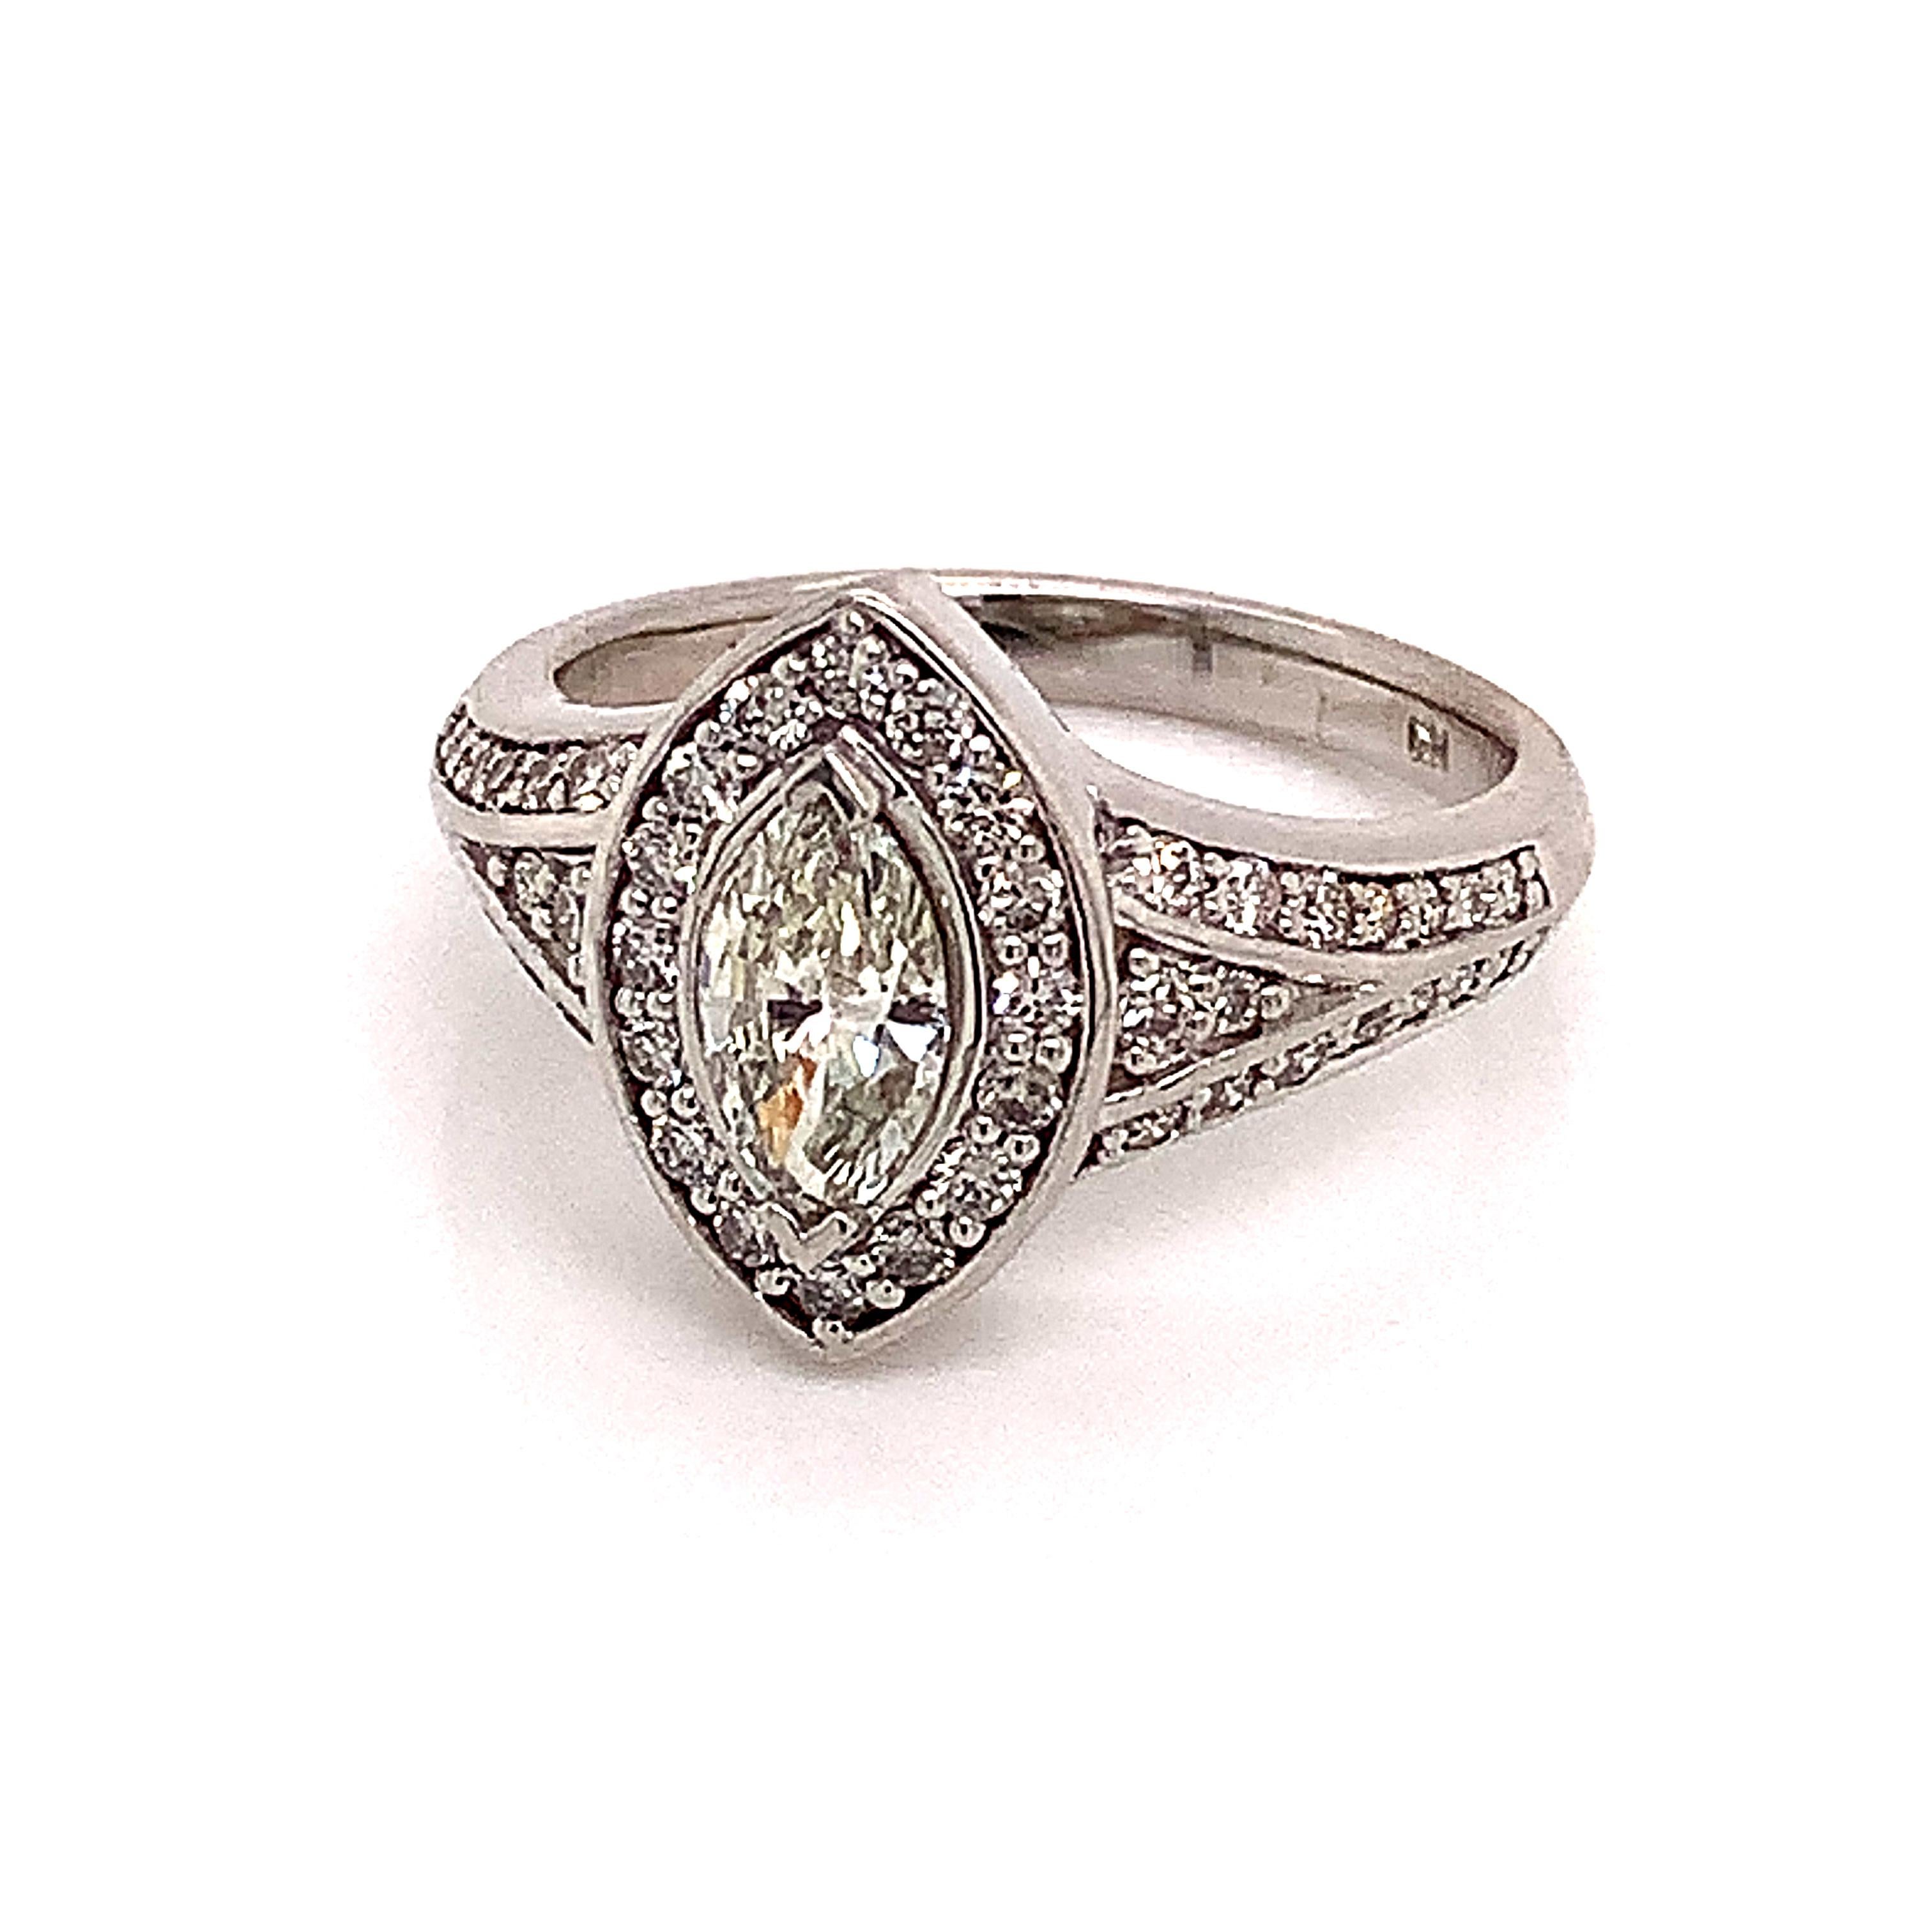 Diamond Ring 14k White Gold 0.45 TCW 4.88g Certified For Sale 4